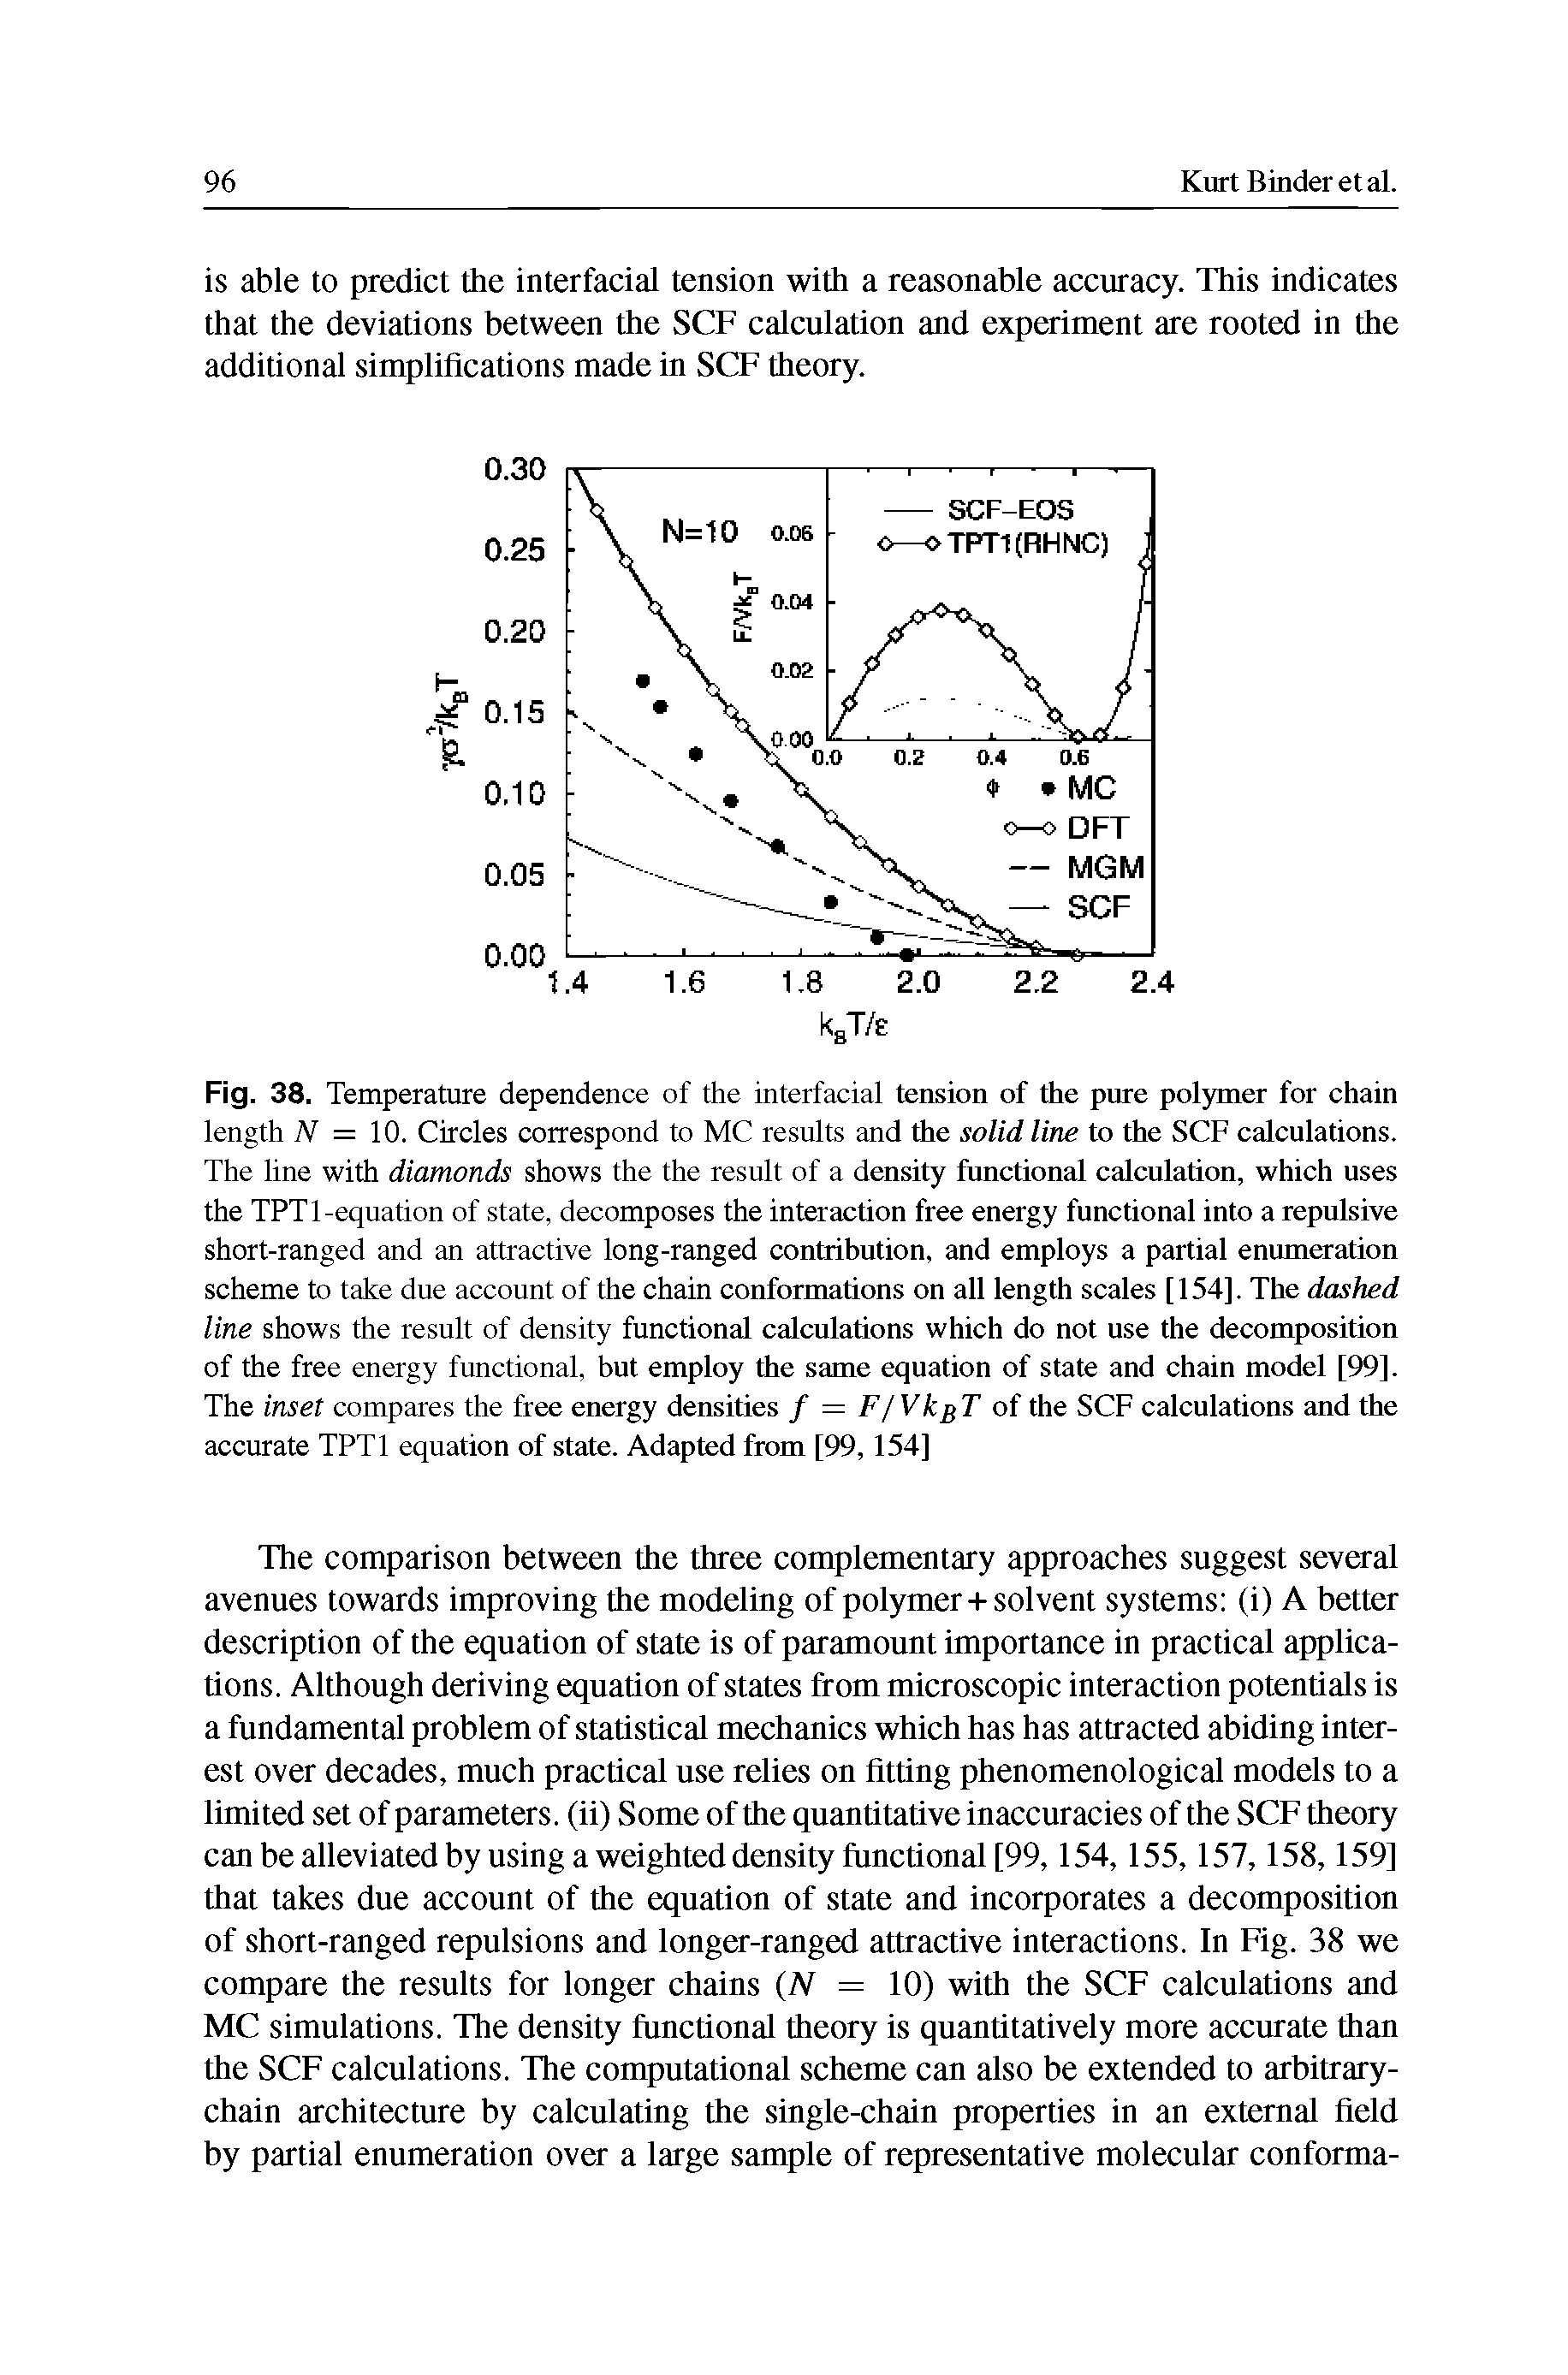 Fig. 38. Temperature dependence of the interfacial tension of the pure polymer for chain length N = 10. Circles correspond to MC results and the solid line to the SCF ealculations. The line with diamonds shows the the result of a density functional calculation, which uses the TPTl-equation of state, decomposes the interaction free energy functional into a repulsive short-ranged and an attractive long-ranged contribution, and employs a partial enumeration scheme to take due account of the chain conformations on all length scales [154]. The dashed line shows the result of density functional calculations which do not use the decomposition of the free energy functional, but employ the same equation of state and chain model [99]. The inset compares the free energy densities / = F/VkgT of the SCF calculations and the accurate TPTl equation of state. Adapted from [99,154]...